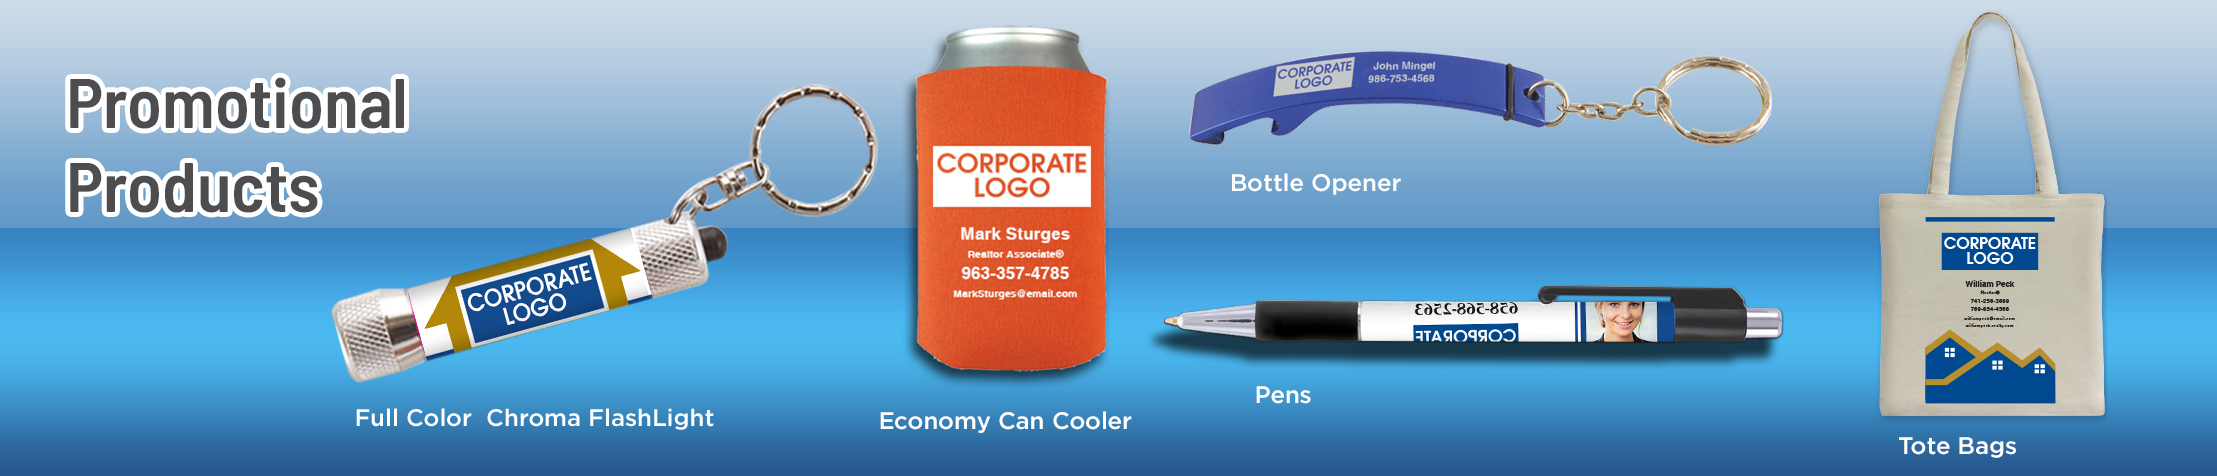 Coldwell Banker Real Estate Promotional Products - CB personalized promotional pens, key chains, tote bags, flashlights, mugs | Sparkprint.com